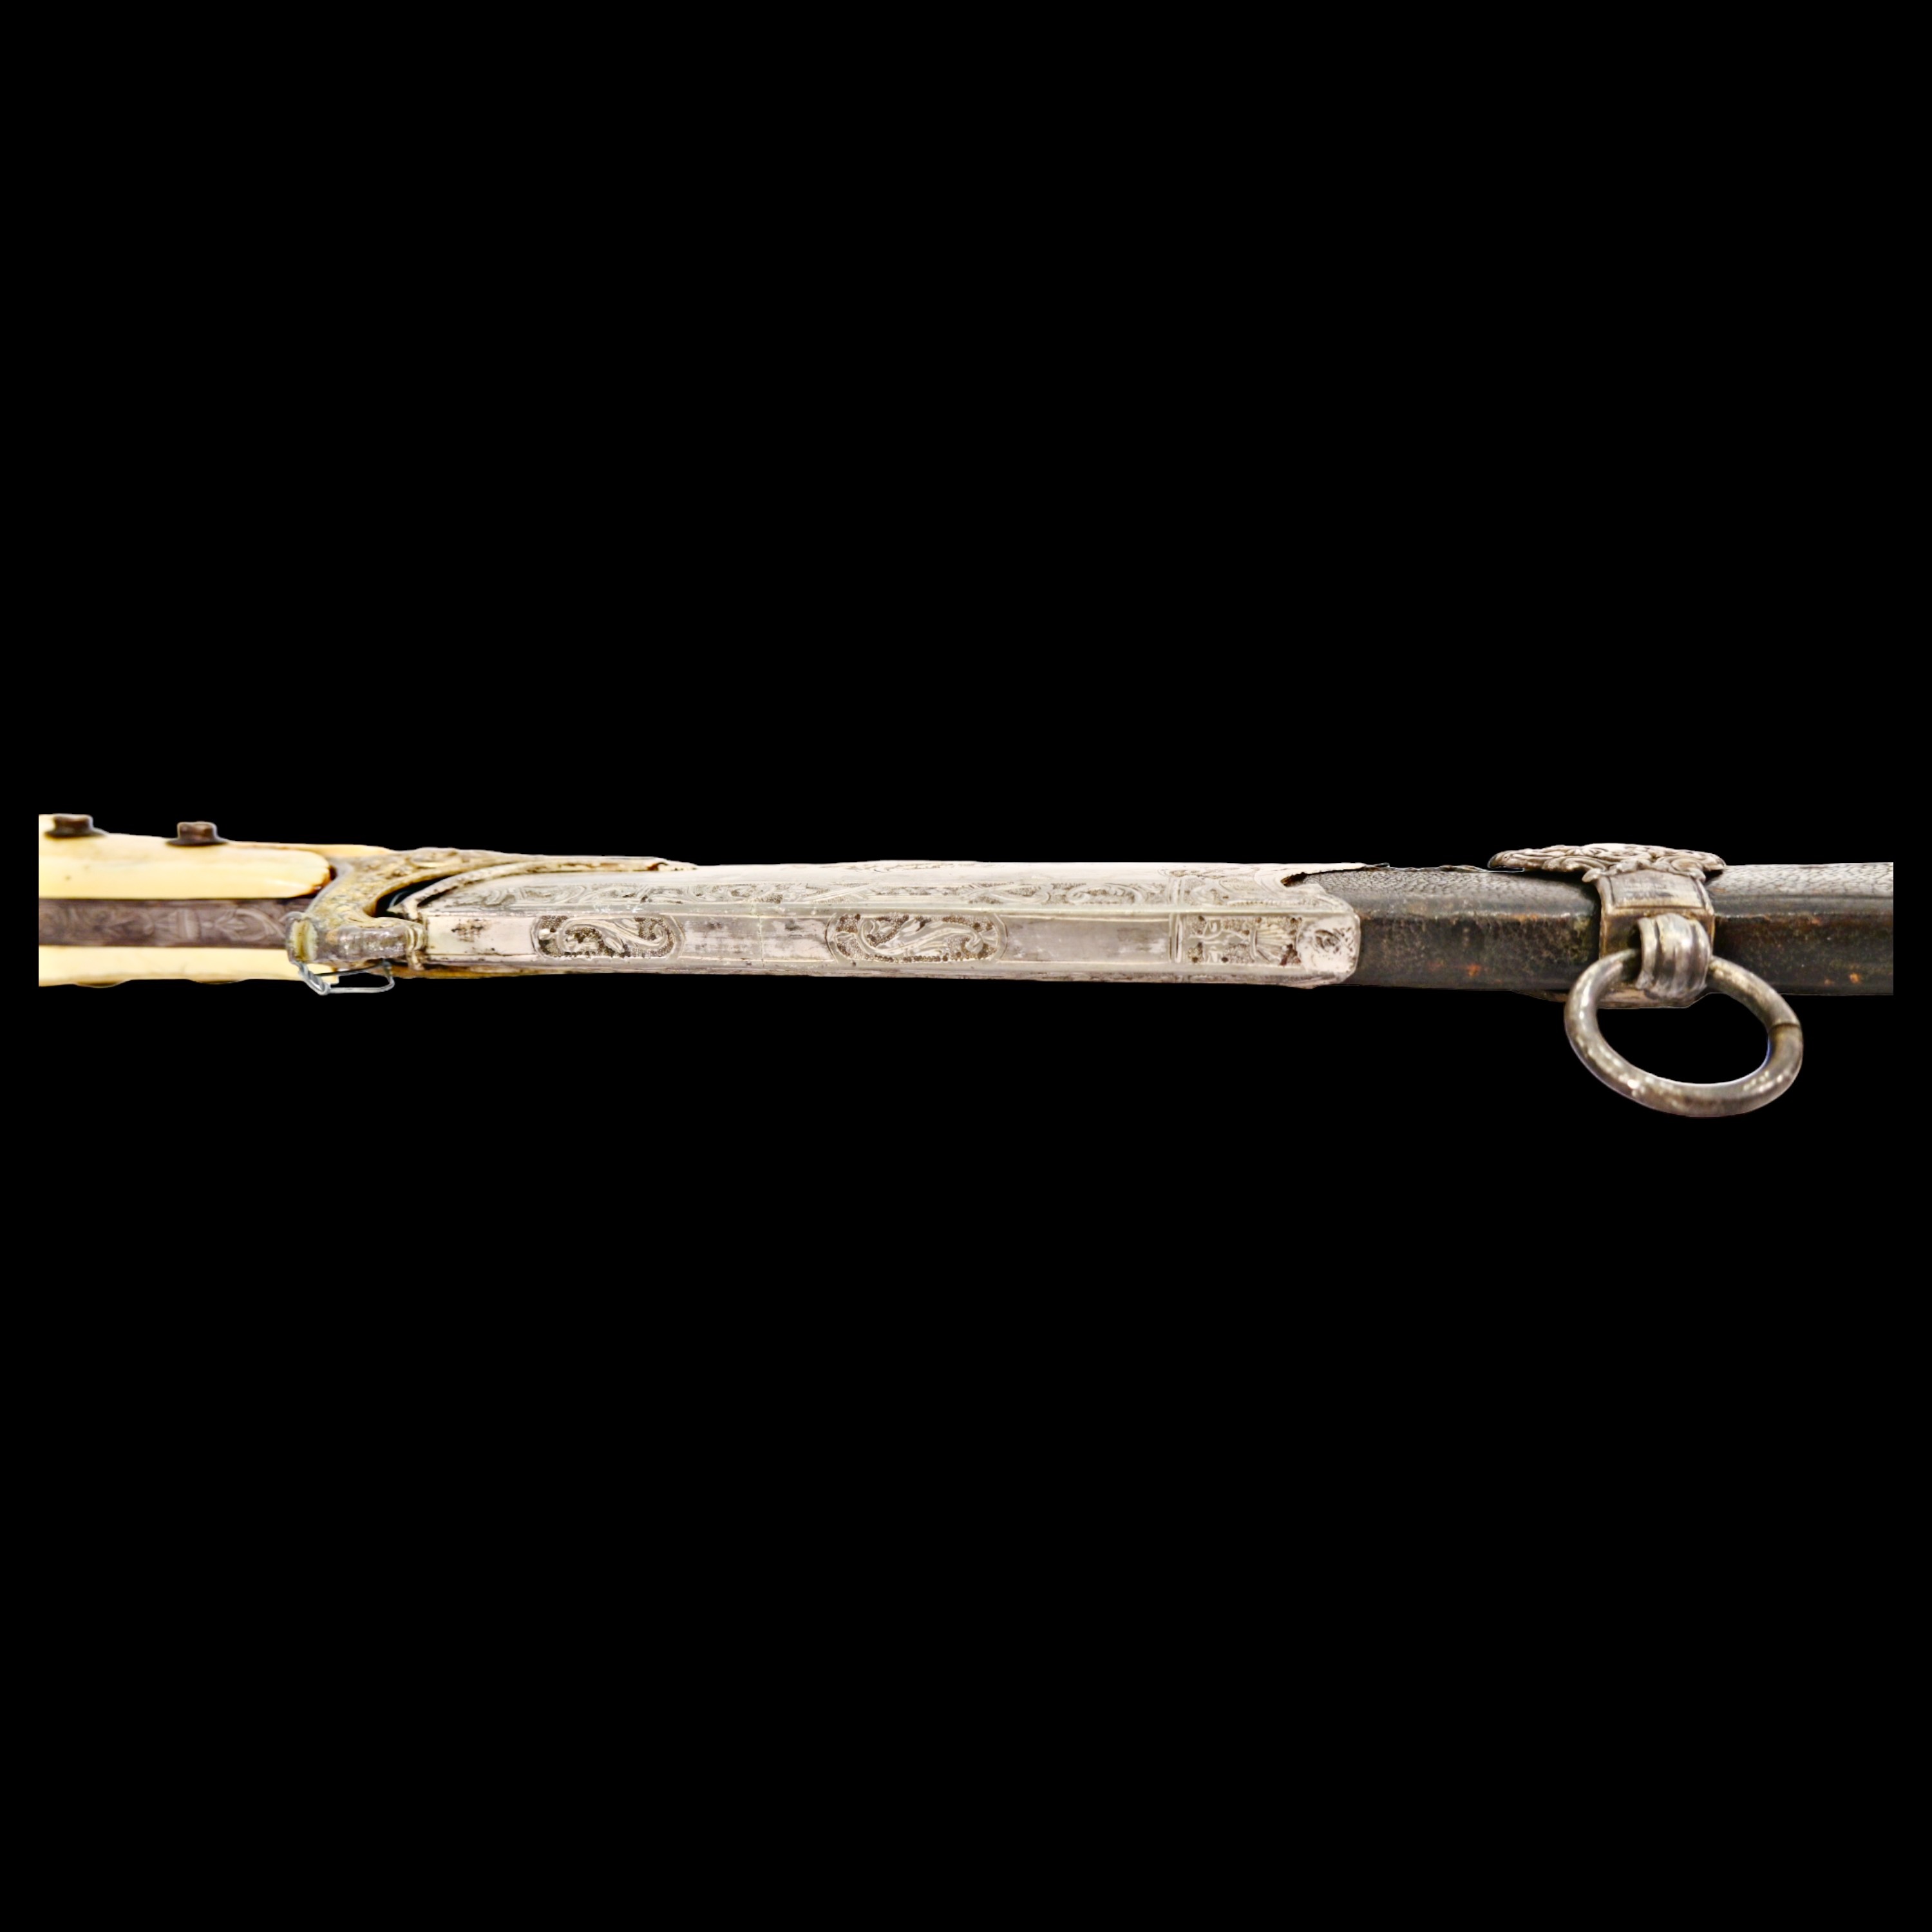 Rare Ottoman saber KARABELA, wootz blade, silver with the tugra of Sultan Ahmed III, early 18th C. - Image 12 of 27